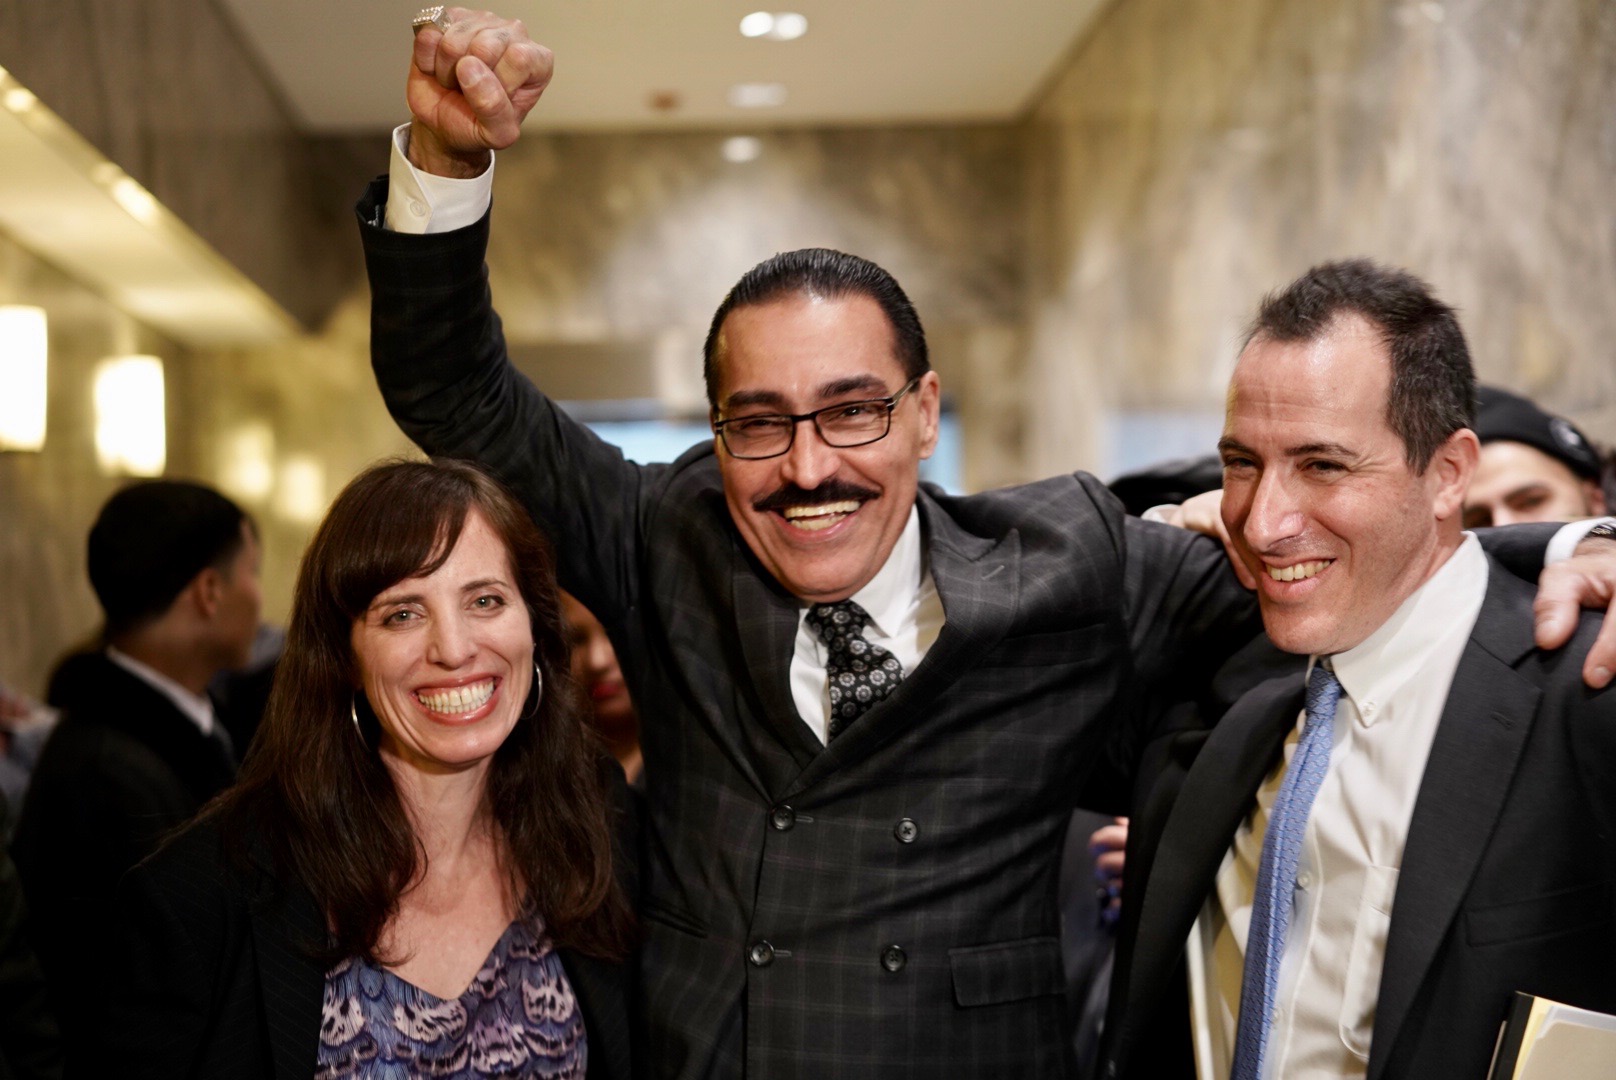 Photo: Innocence Project client Felipe Rodriguez is pictured with his attorneys Nina Morrison (senior litigation counsel at the Innocence Project) and Zachary Margulis-Ohnuma on the day he was exonerated in New York City. Felipe was wrongfully convicted based largely on the false testimony of a police informant and because evidence supporting his innocence was unlawfully withheld from his defense attorney. In 2017, Felipe was freed from prison after 27 years when his sentence was commuted by Governor Andrew M. Cuomo. As a result of a reinvestigation conducted by the Innocence Project and the Queens County District Attorney’s Office, Felipe was fully exonerated in 2019 after seeking justice for nearly 30 years.
Credit: Sameer Abdel-Khalek for the Innocence Project.